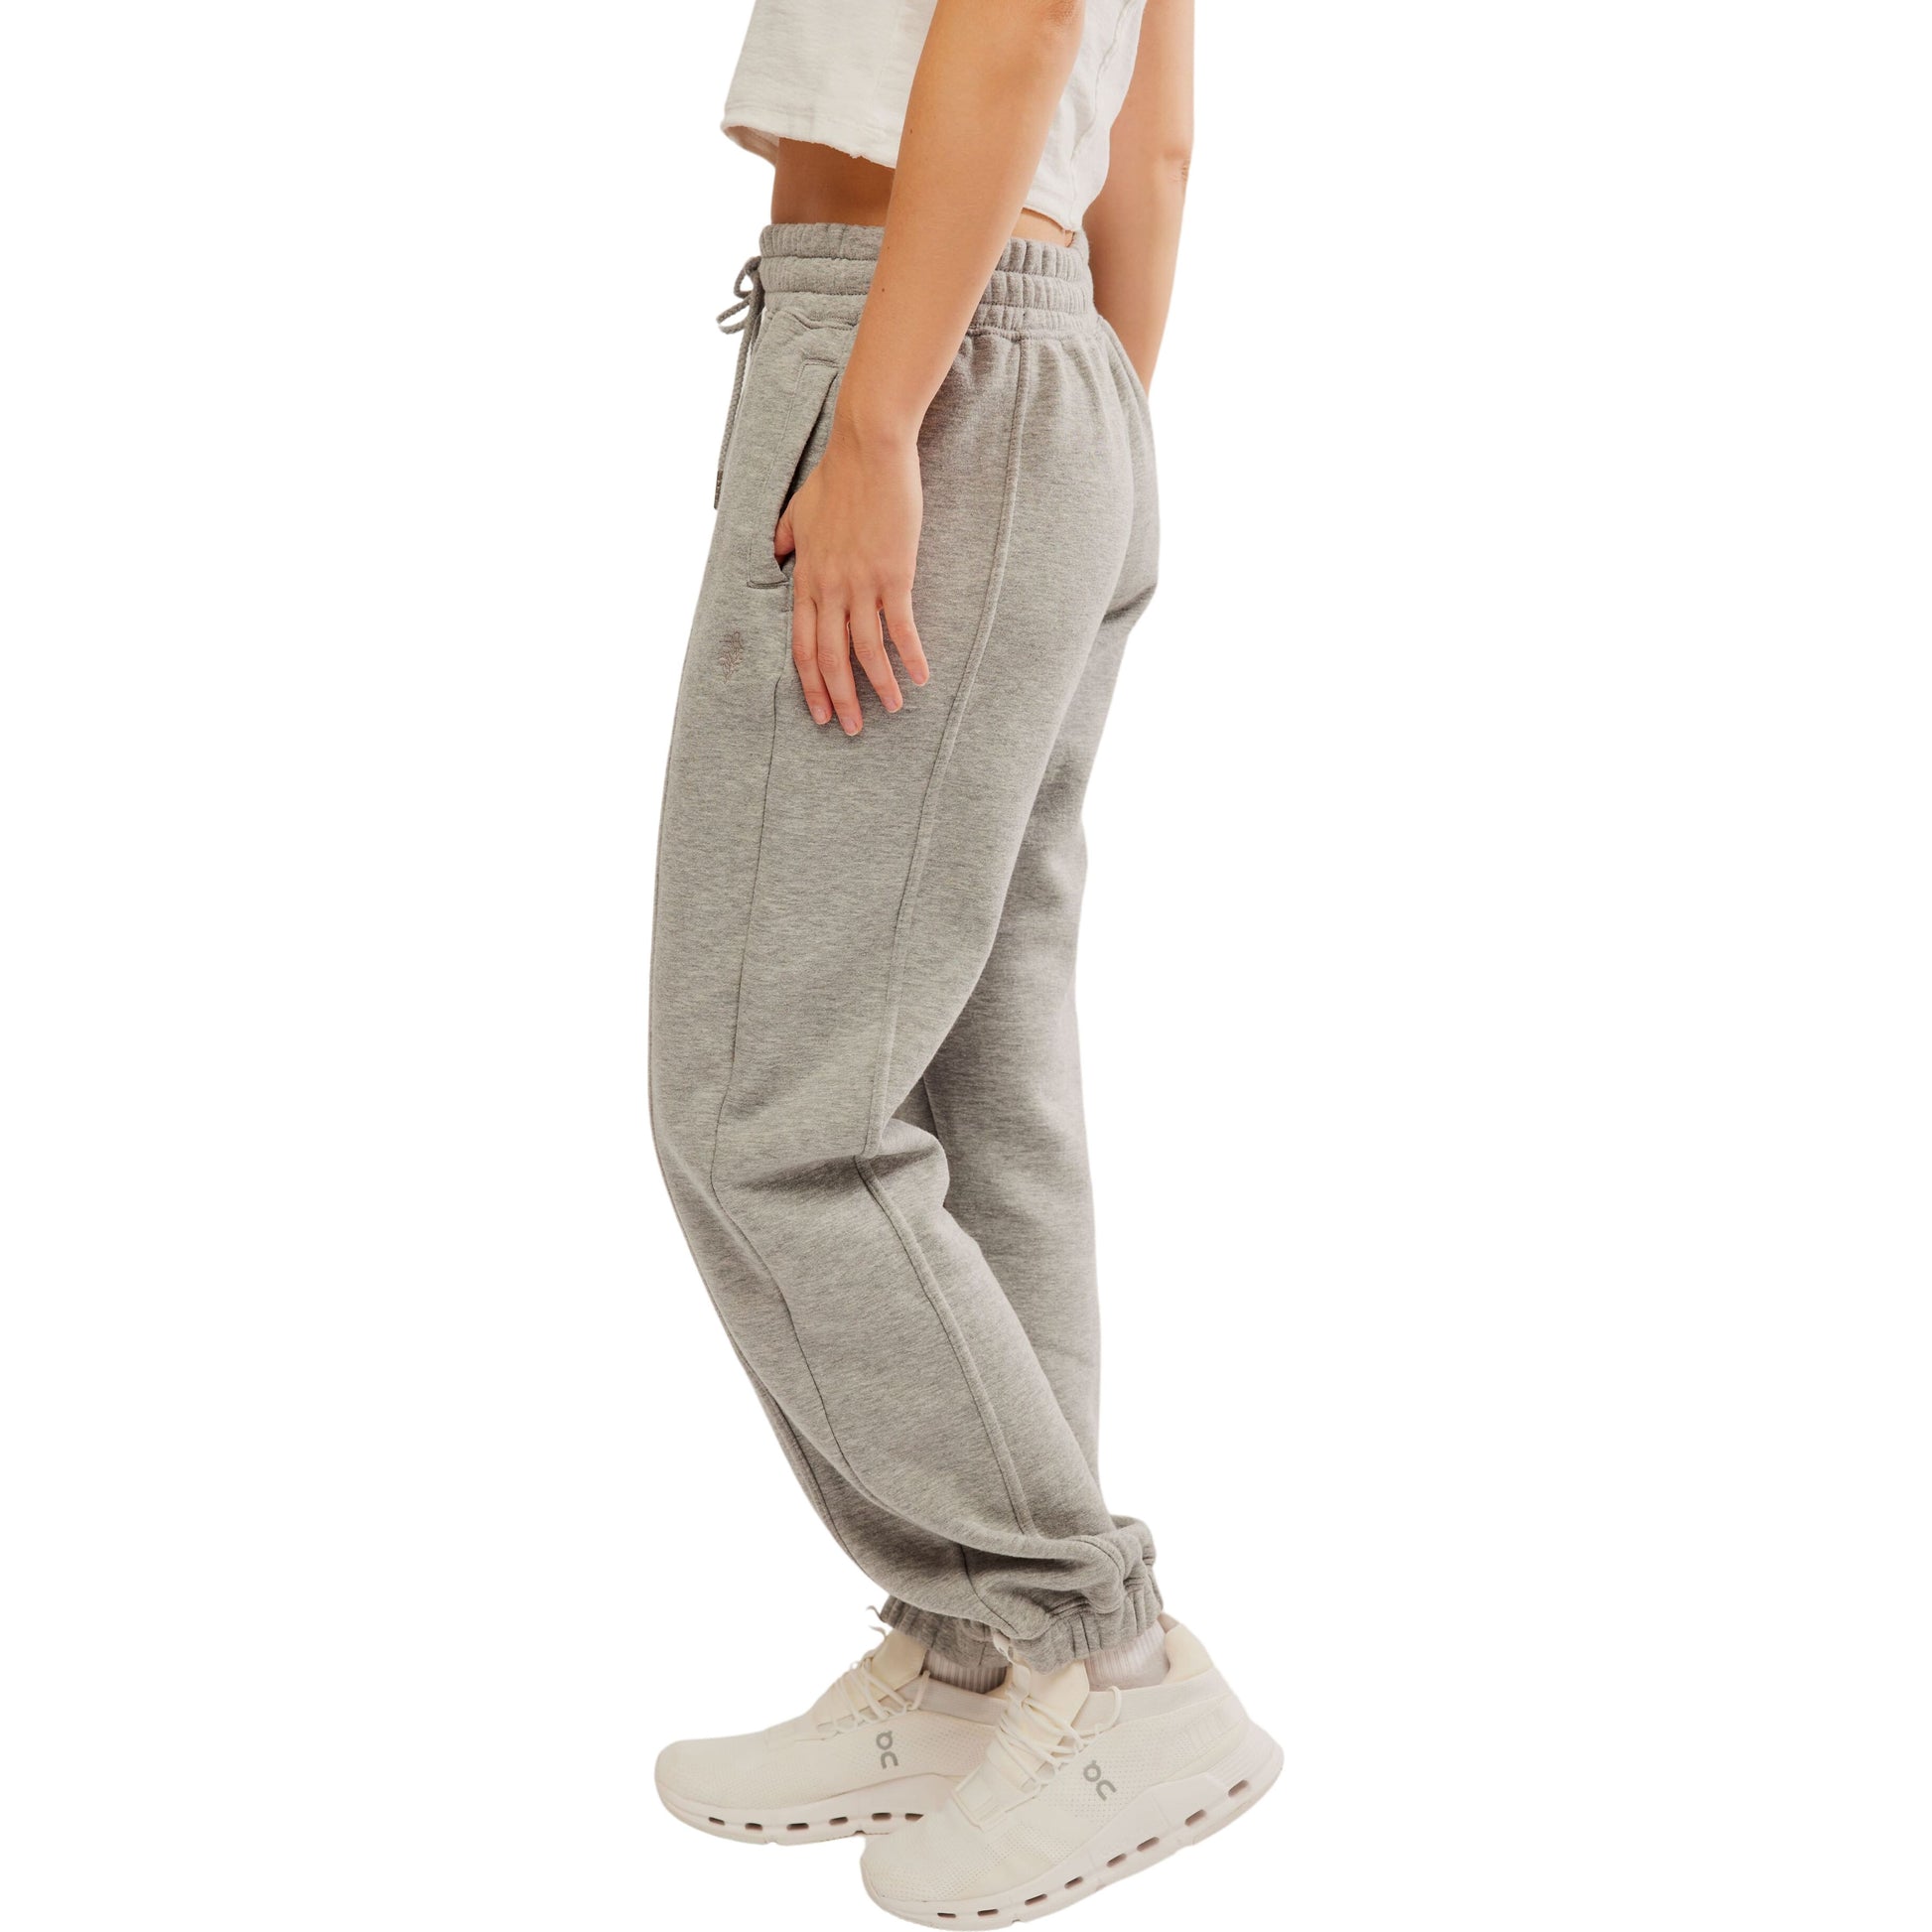 A side view of a person wearing Free People Movement's Sprint To the Finish Pant in Heather Grey and white sneakers, with their hand resting on their hip. White background.